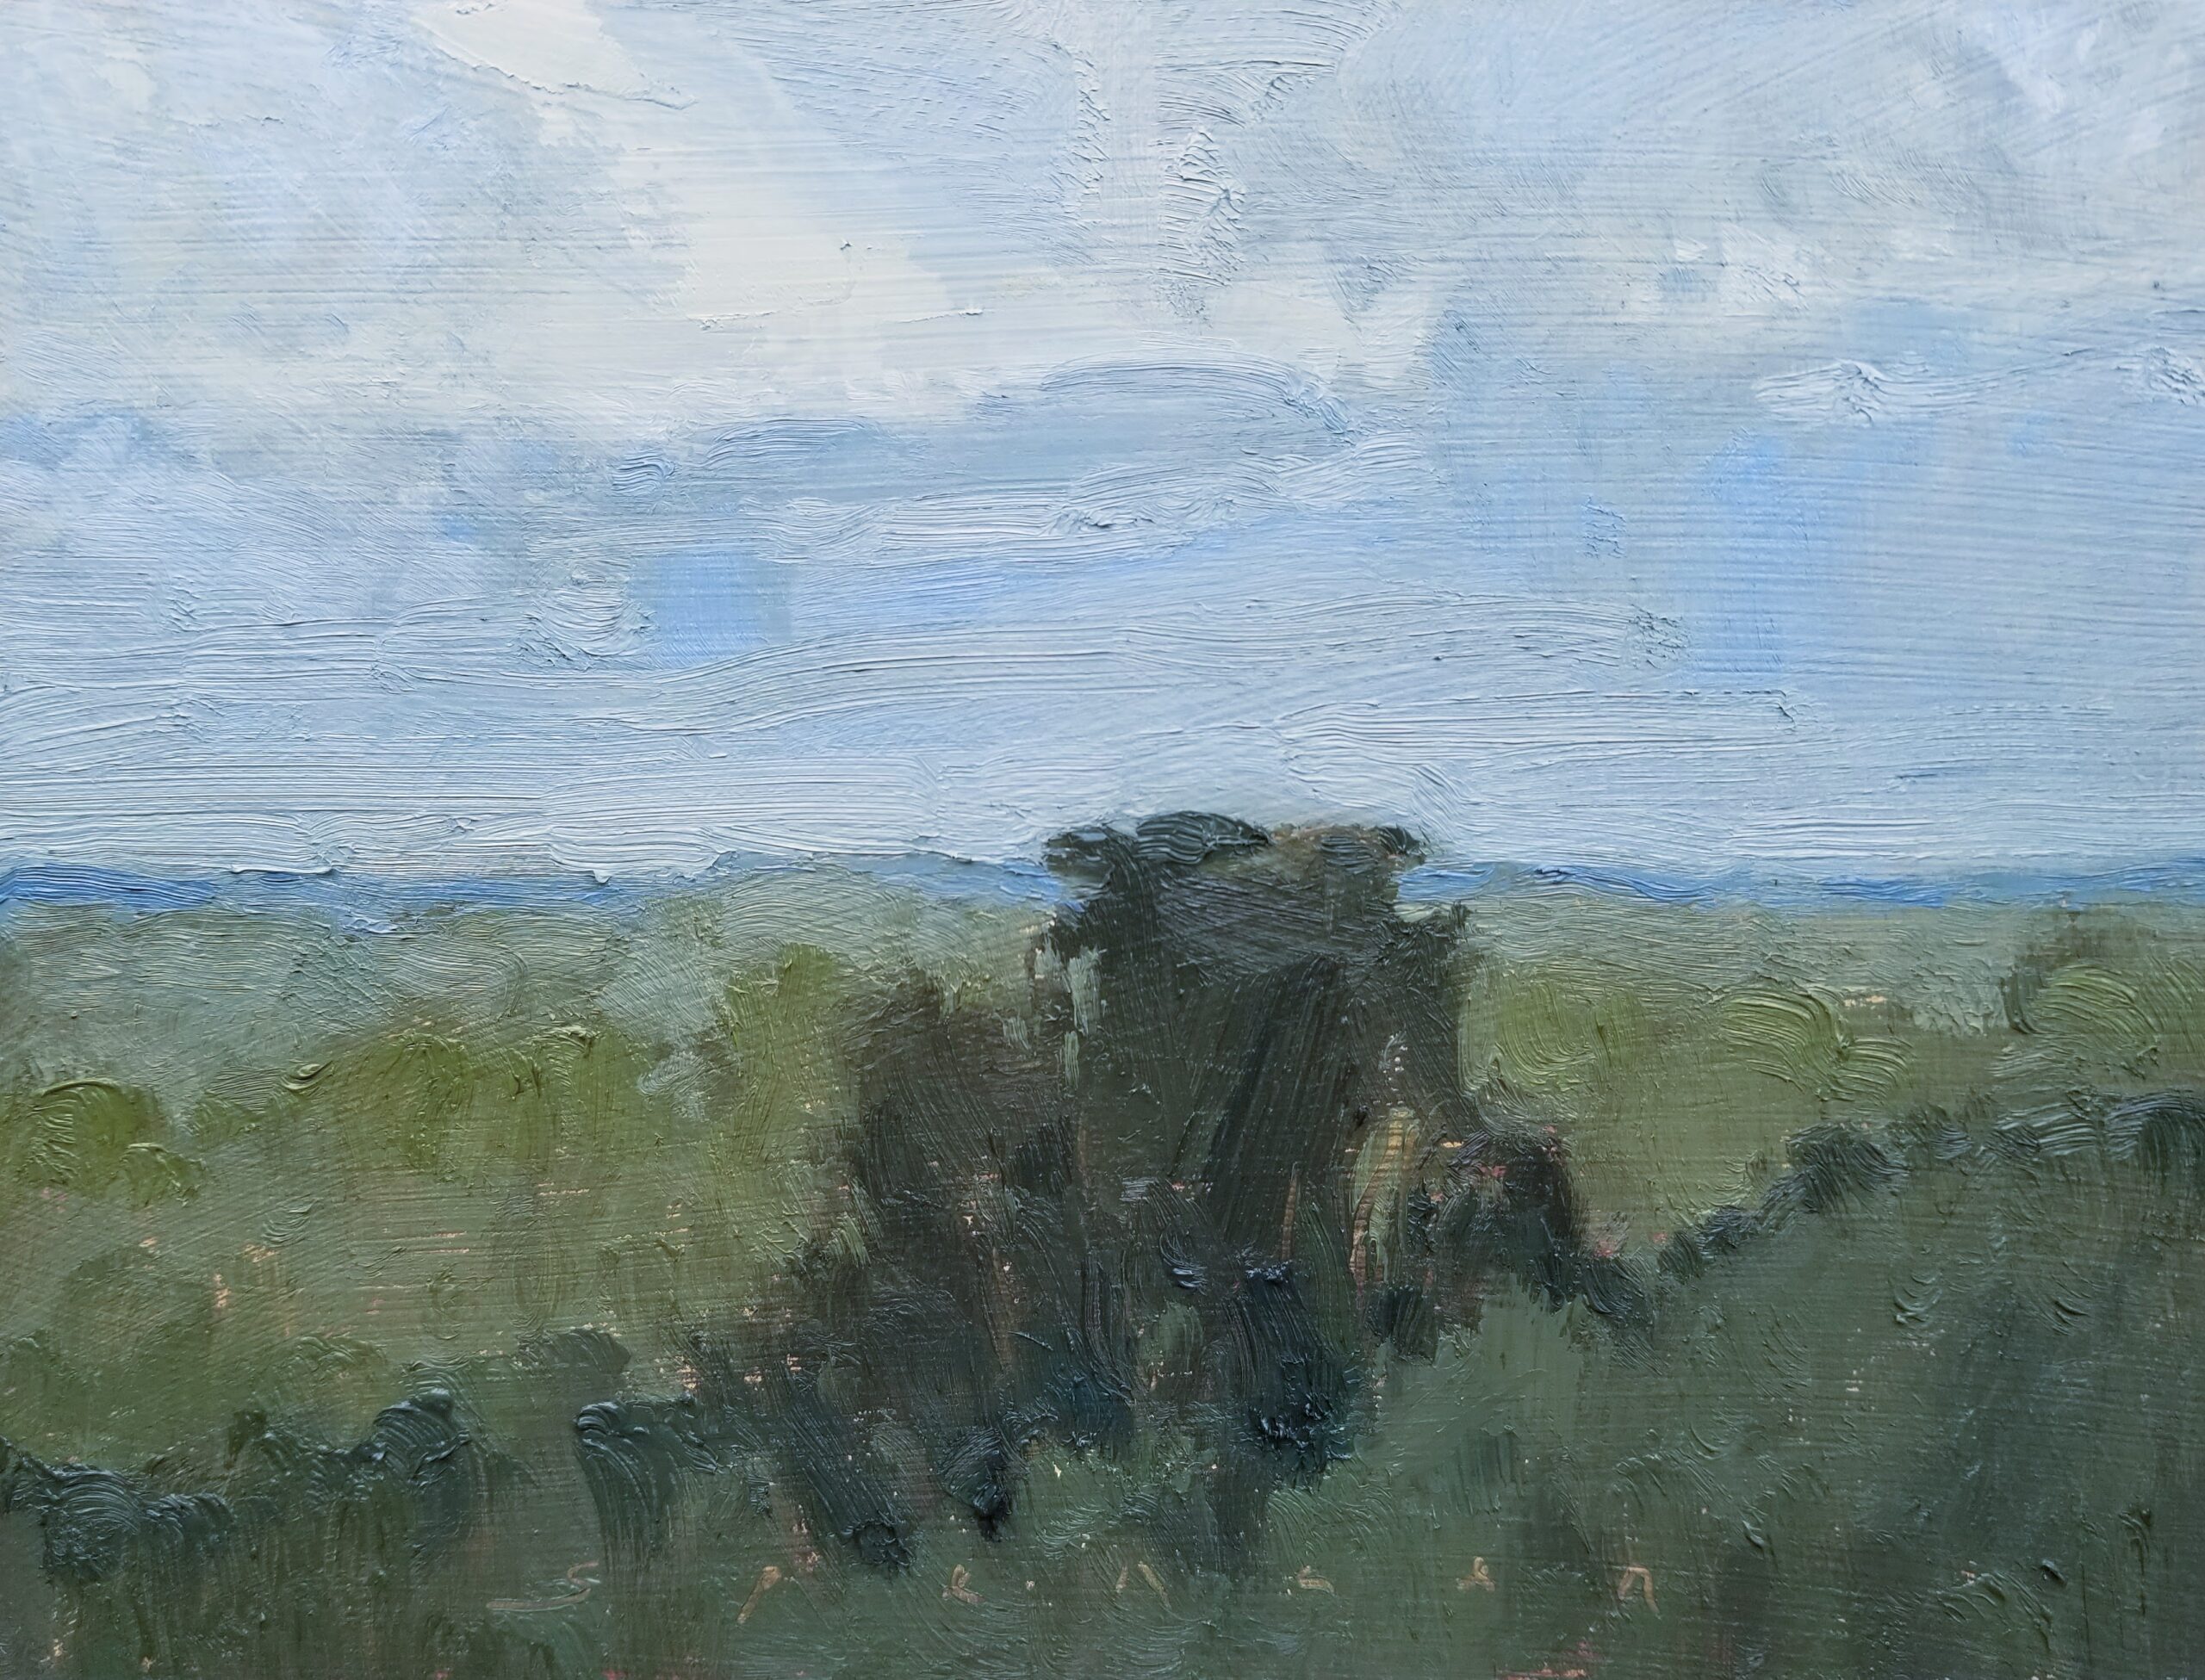 Erin Spencer, "Pearly Skies," 2021, oil, 6 x 8 in., Available from artist, Plein air